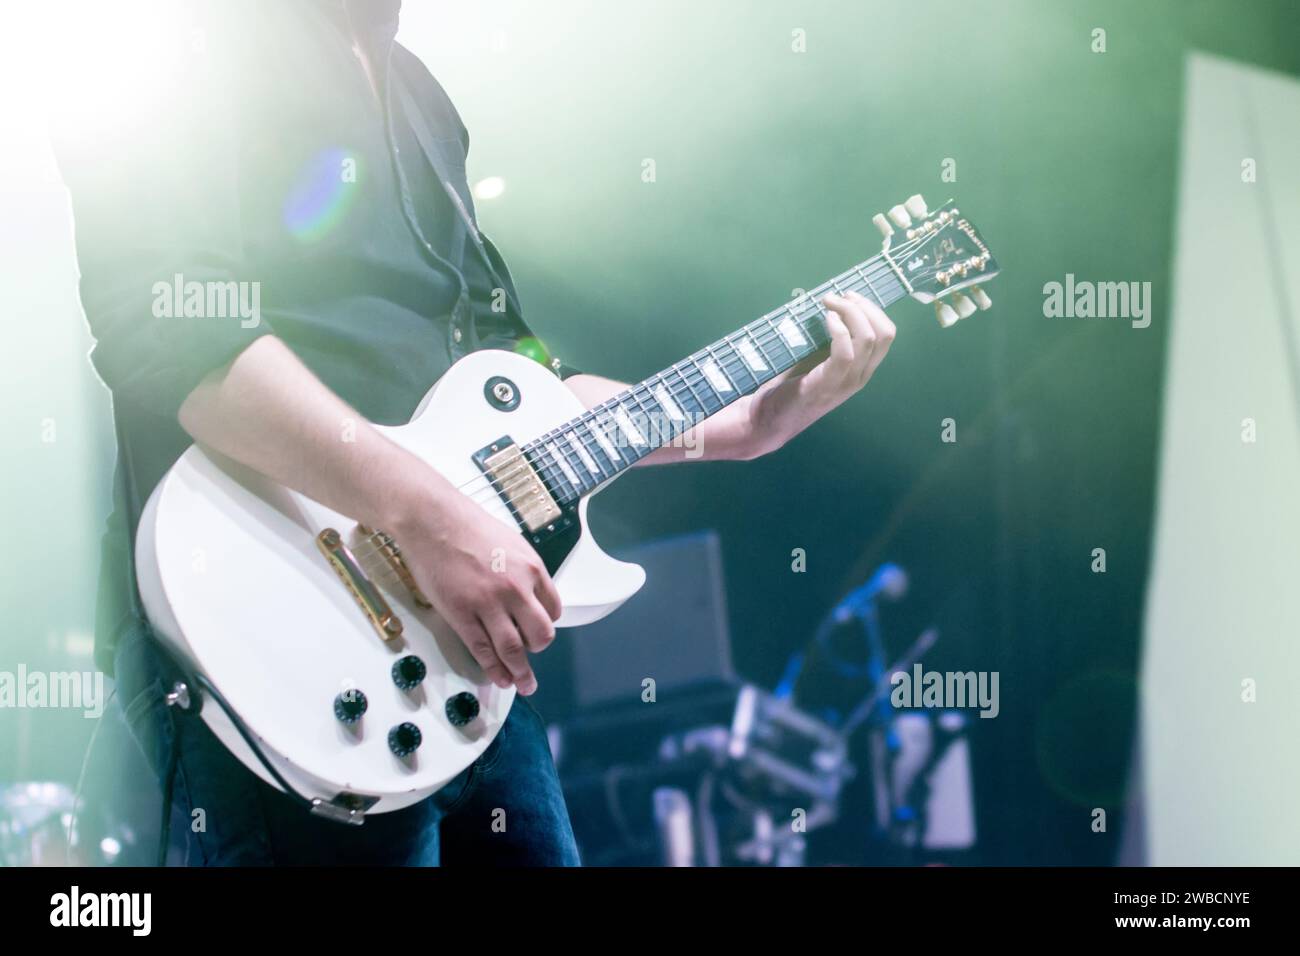 A rock guitarist takes center stage, fingers dancing on the guitar, while the band blurs behind, adding a mysterious rock vibe. Stock Photo